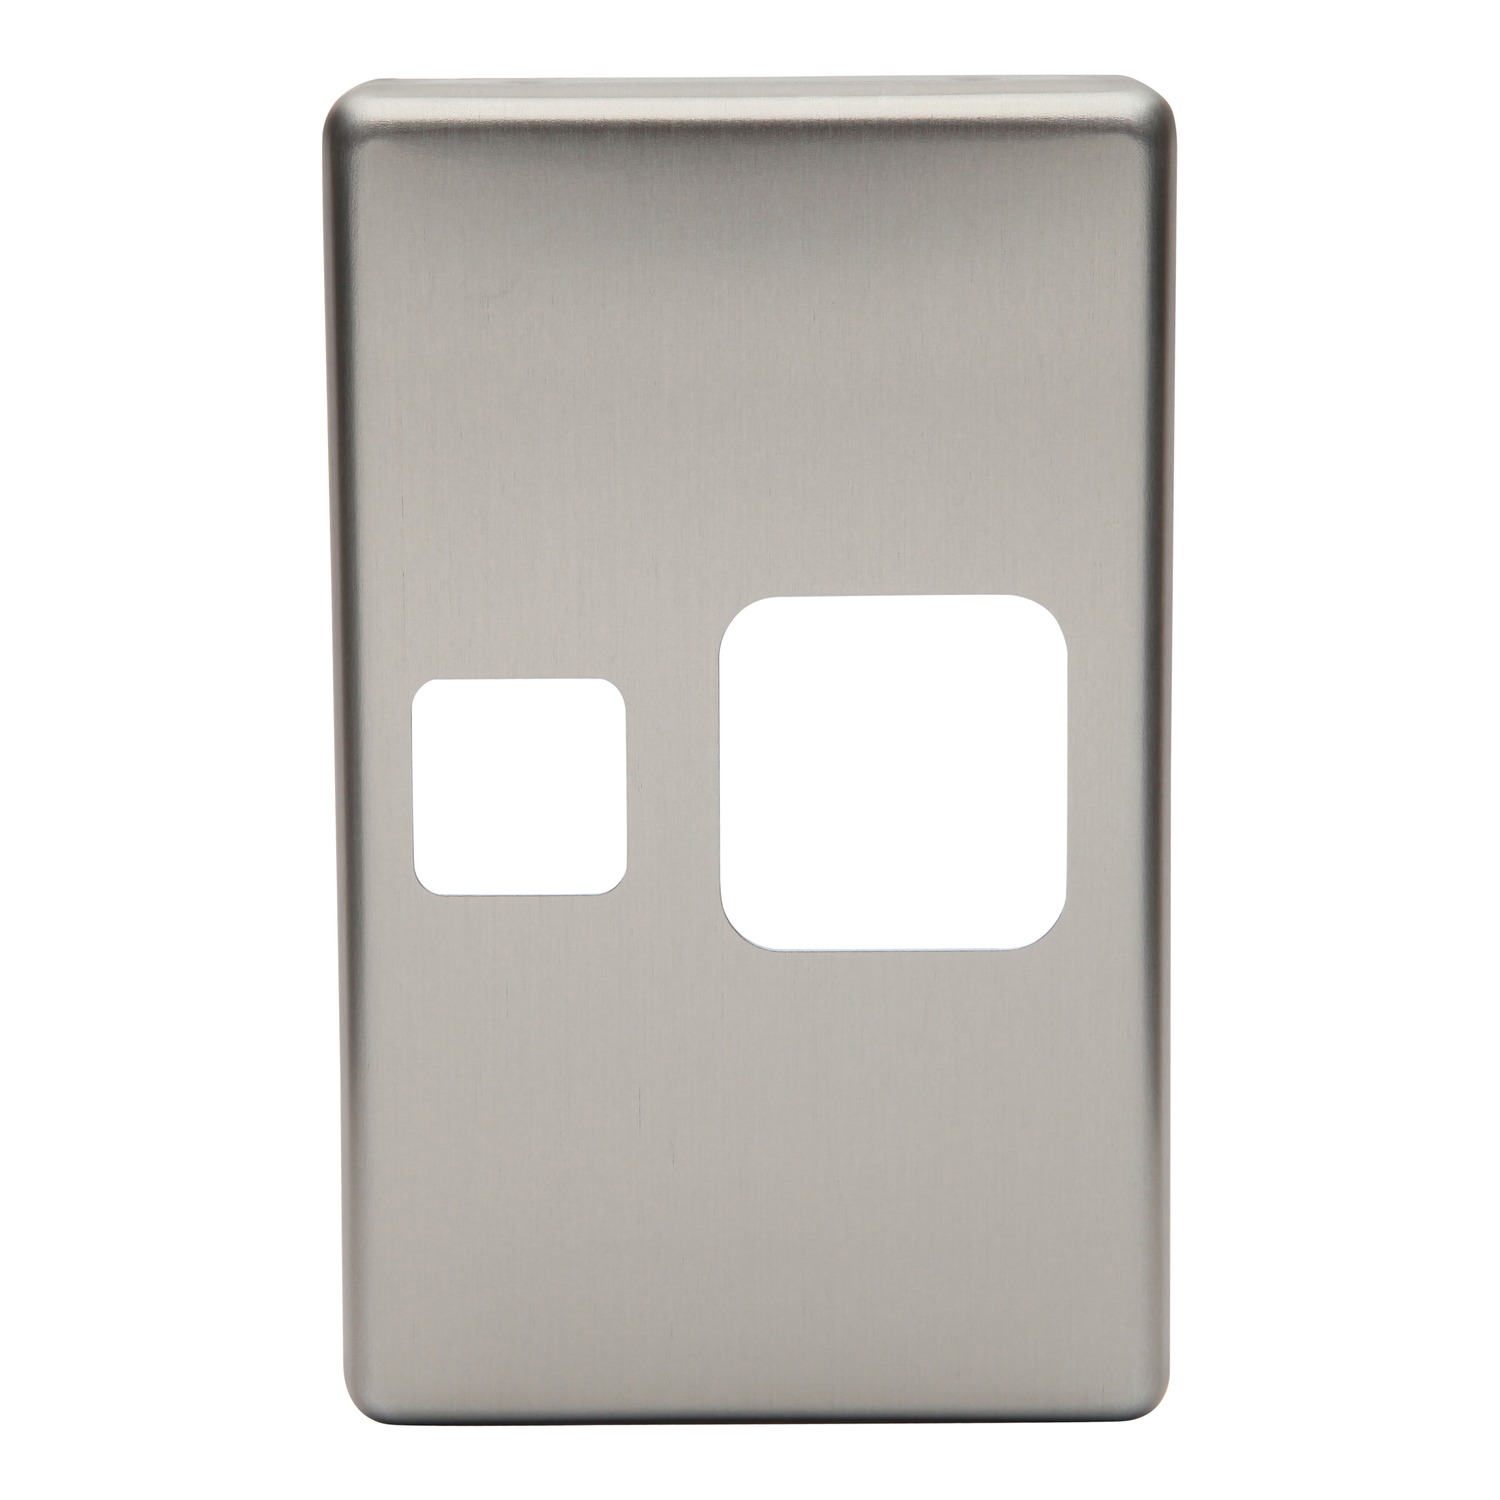 PDL 600 Series - Cover Plate Switched Socket Vertical - Brushed Bronze